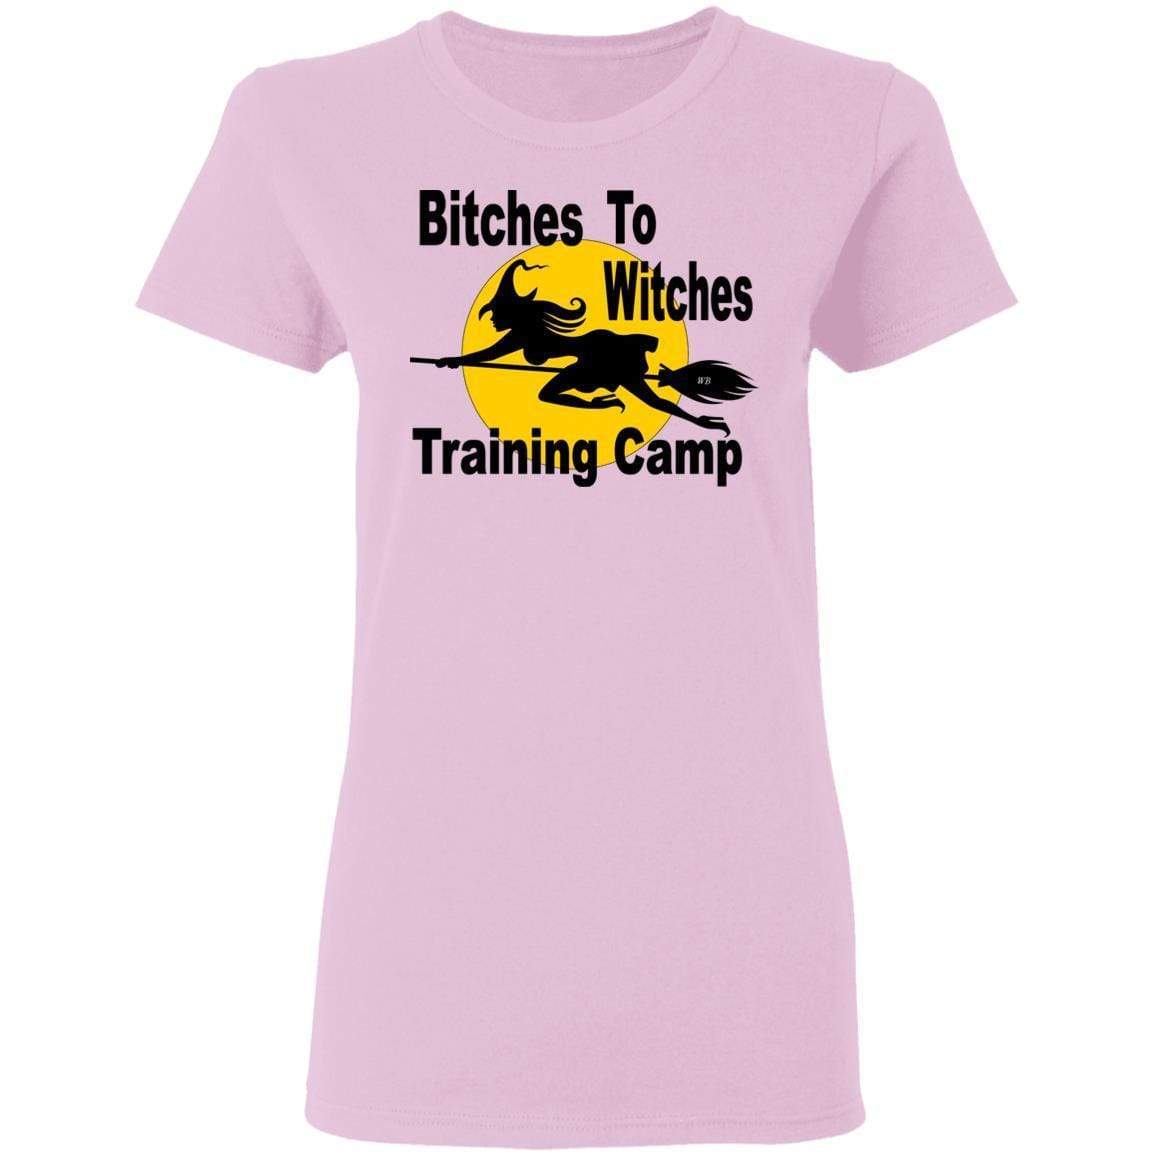 T-Shirts Light Pink / S WineyBitches.Co "Bitches To Witches Training Camp" Halloween Ladies' 5.3 oz. T-Shirt WineyBitchesCo